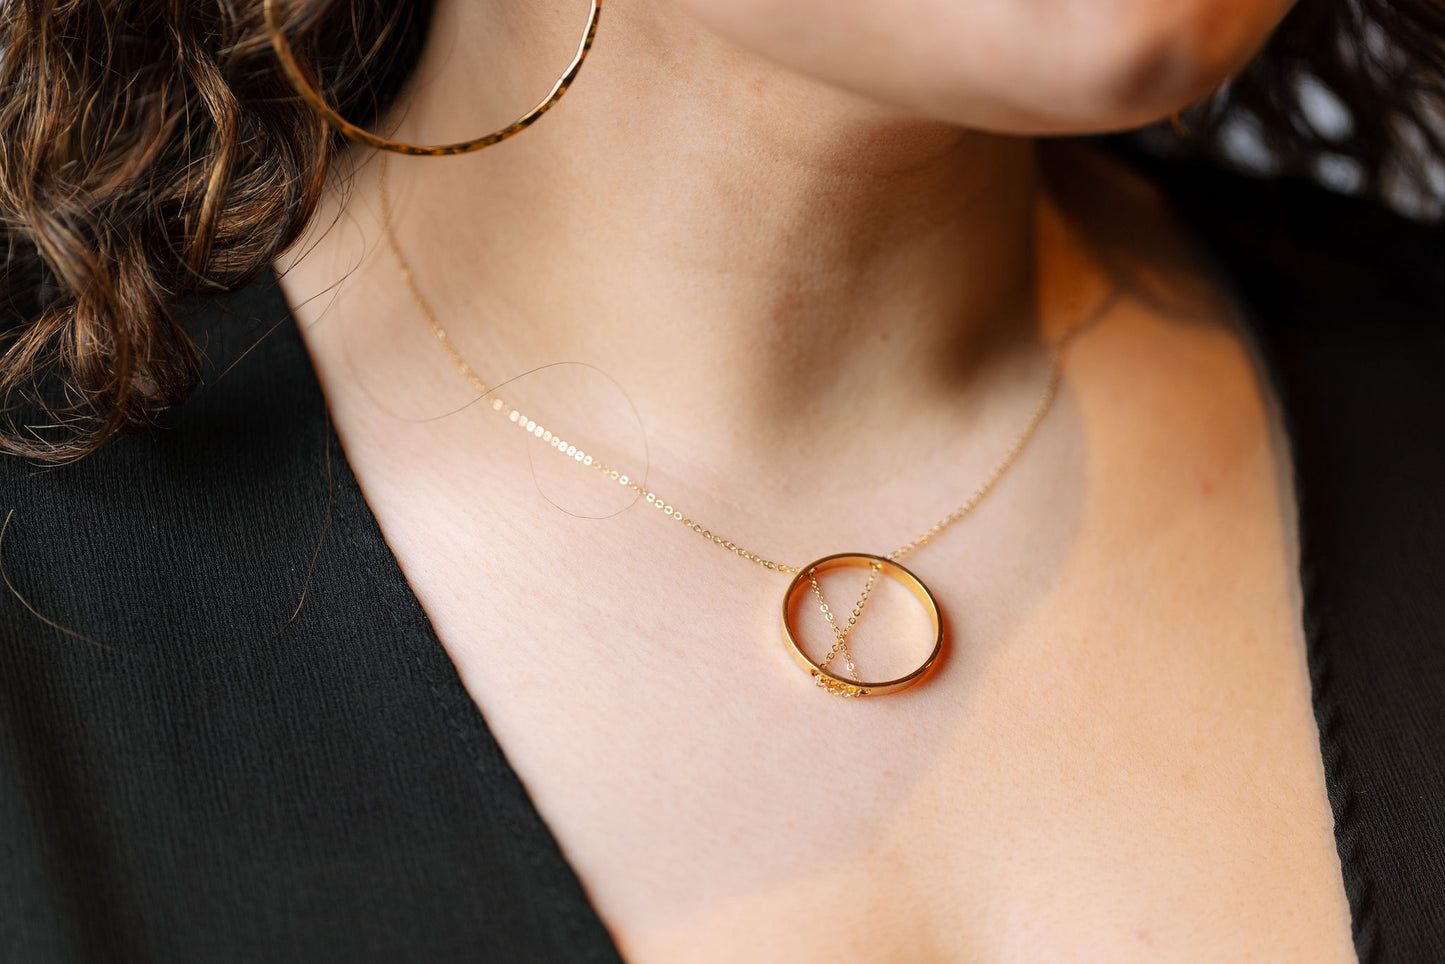 Gold inner circle necklace on model